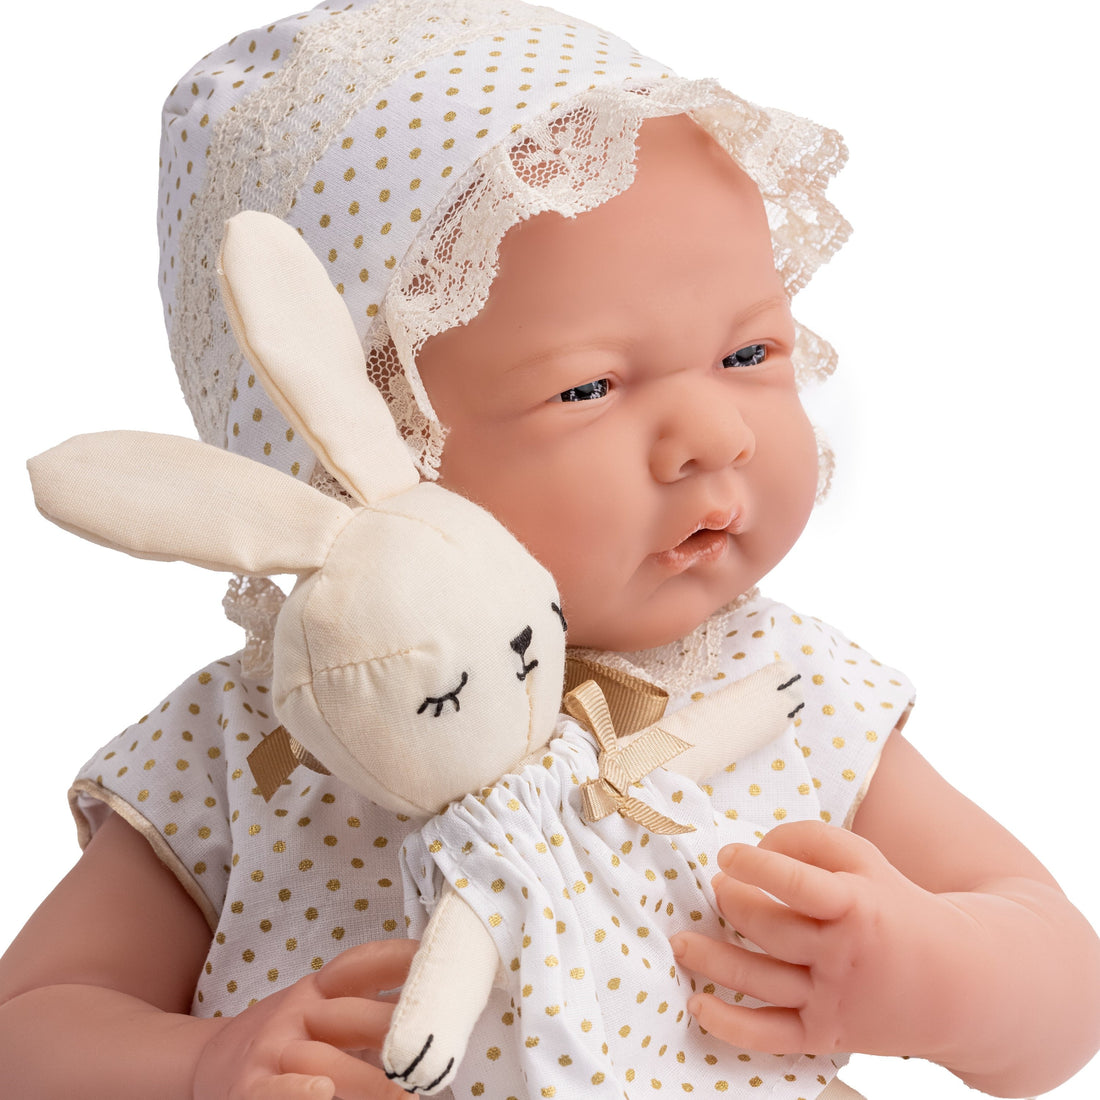 Soft Body La Newborn in Deluxe Royal Themed Outfit w/ Accessories - Dolls and Accessories